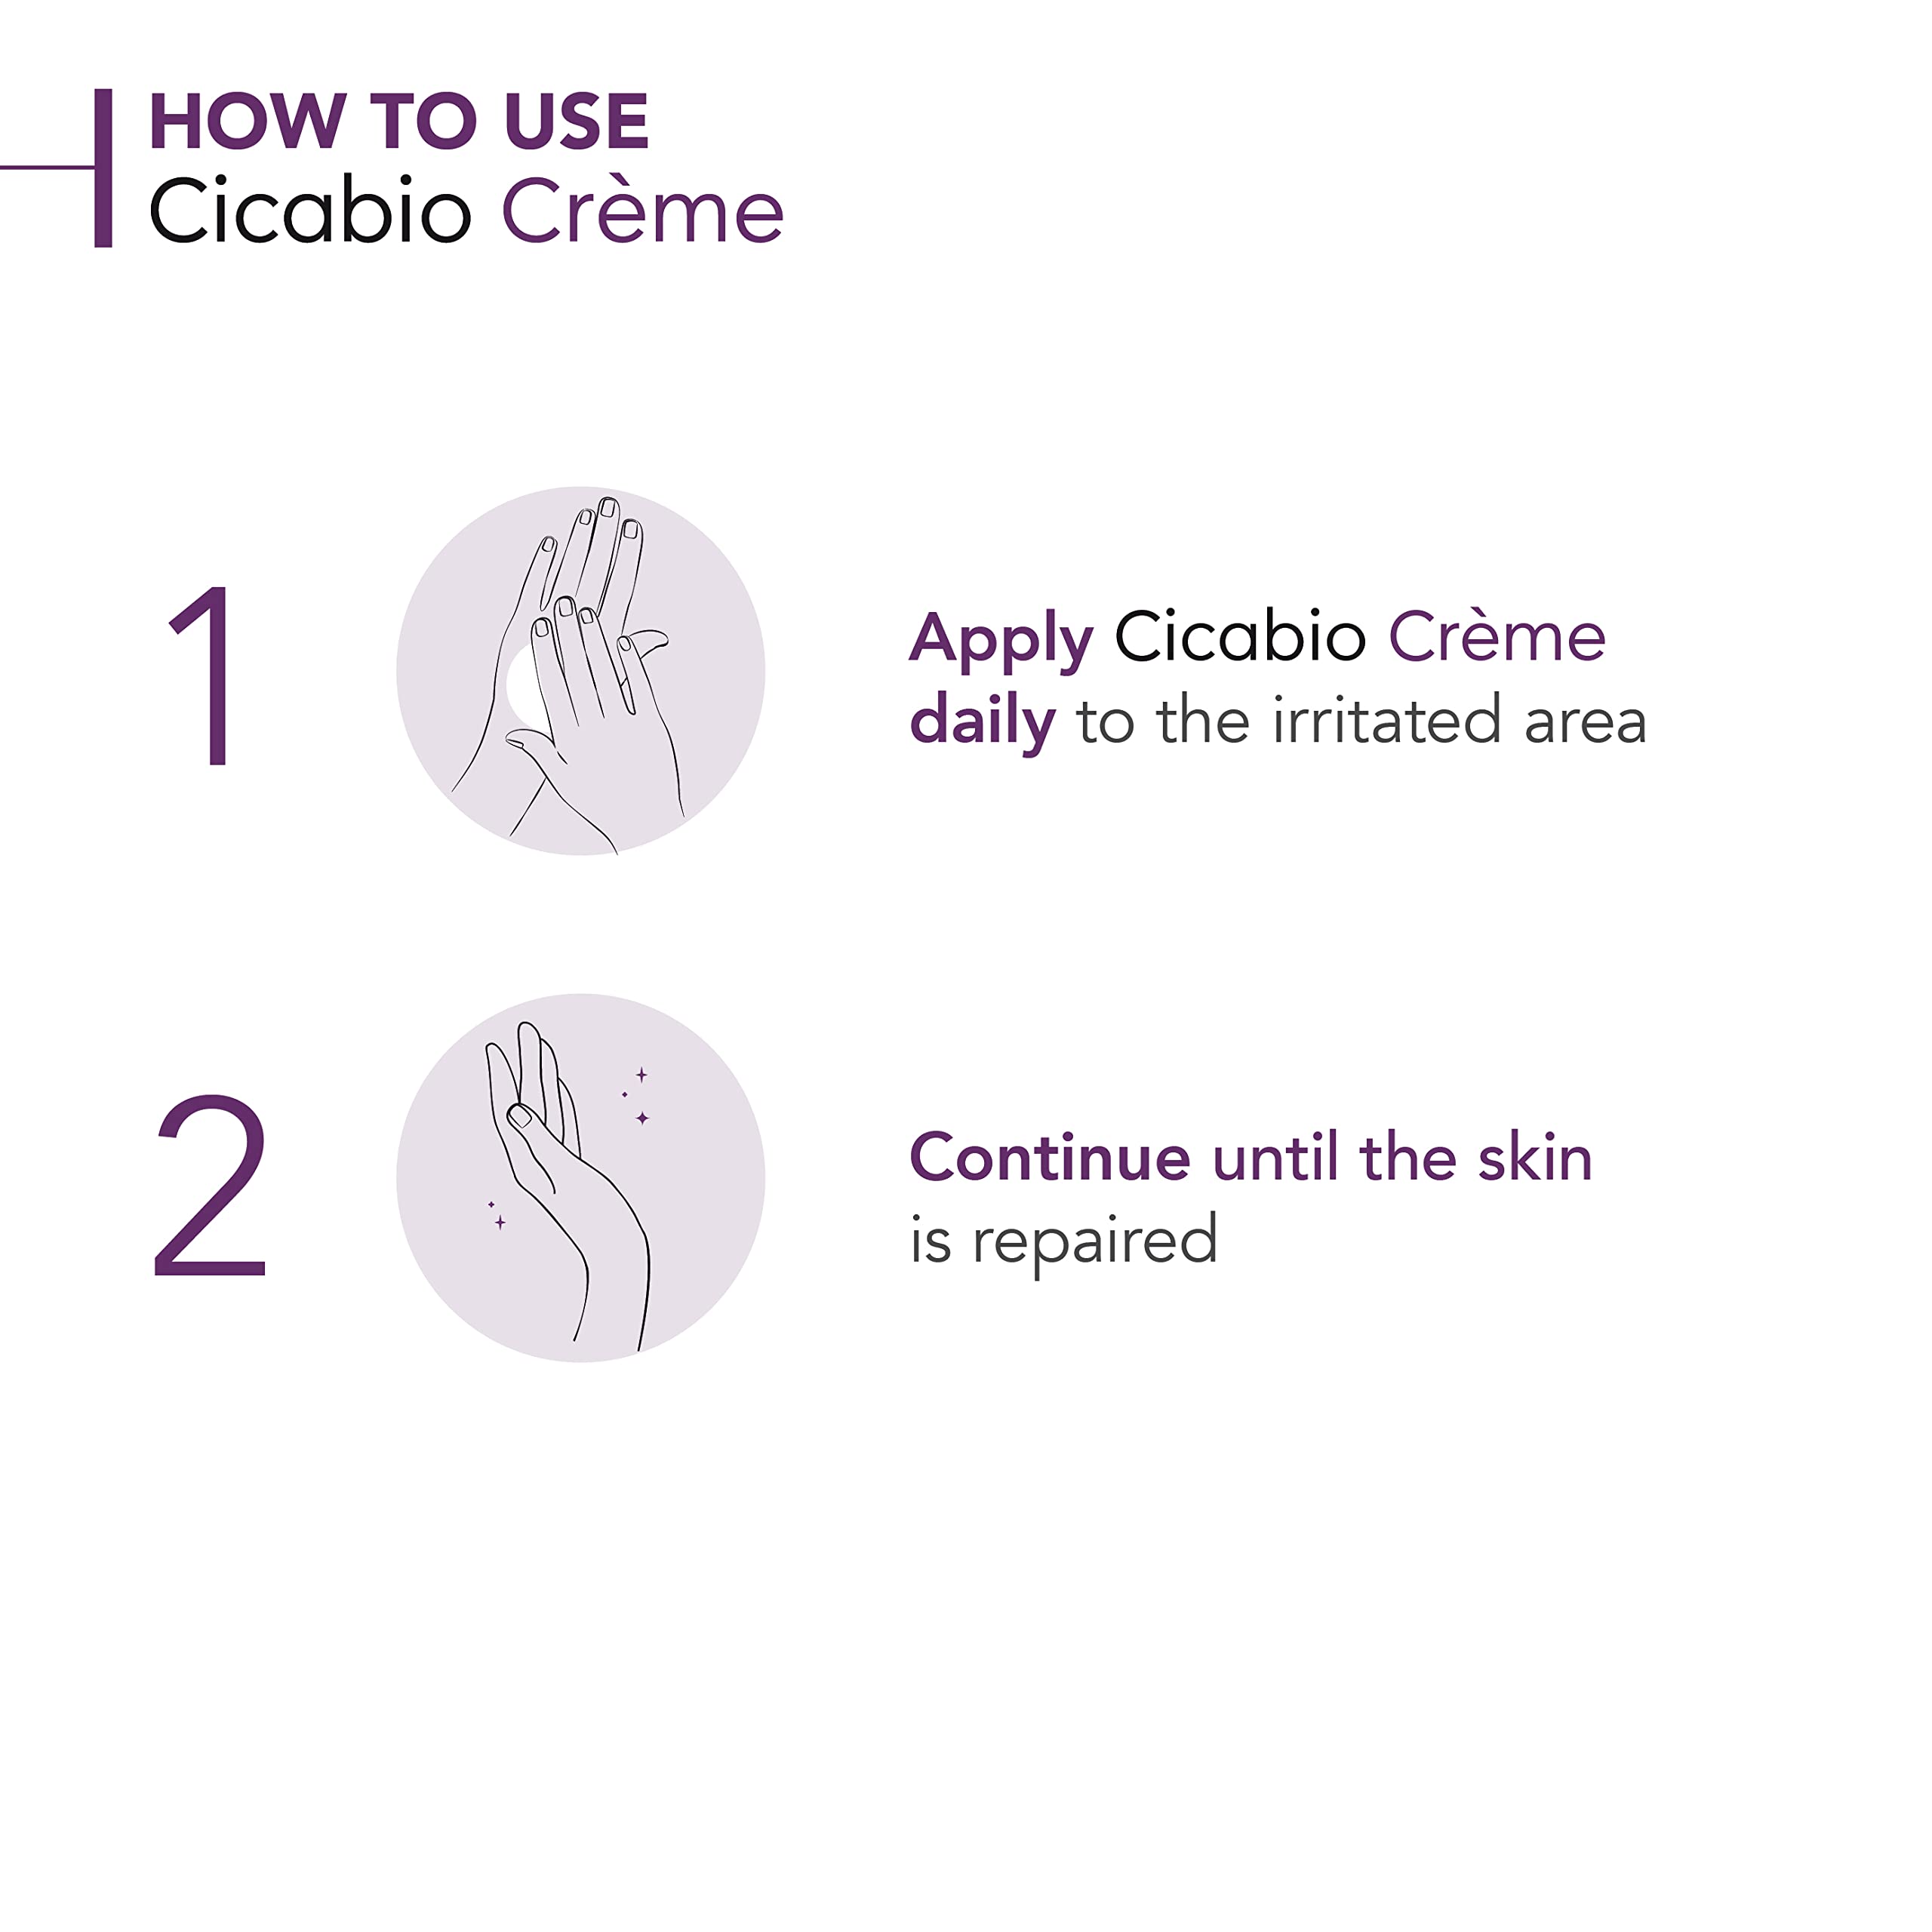 Bioderma - Cicabio - Face Body Cream - Soothing and Renewing Cream - Hydrates, Restores and Soothes the Skin - for Dry Skin Irritations 1.35 Fl Oz (Pack of 1)